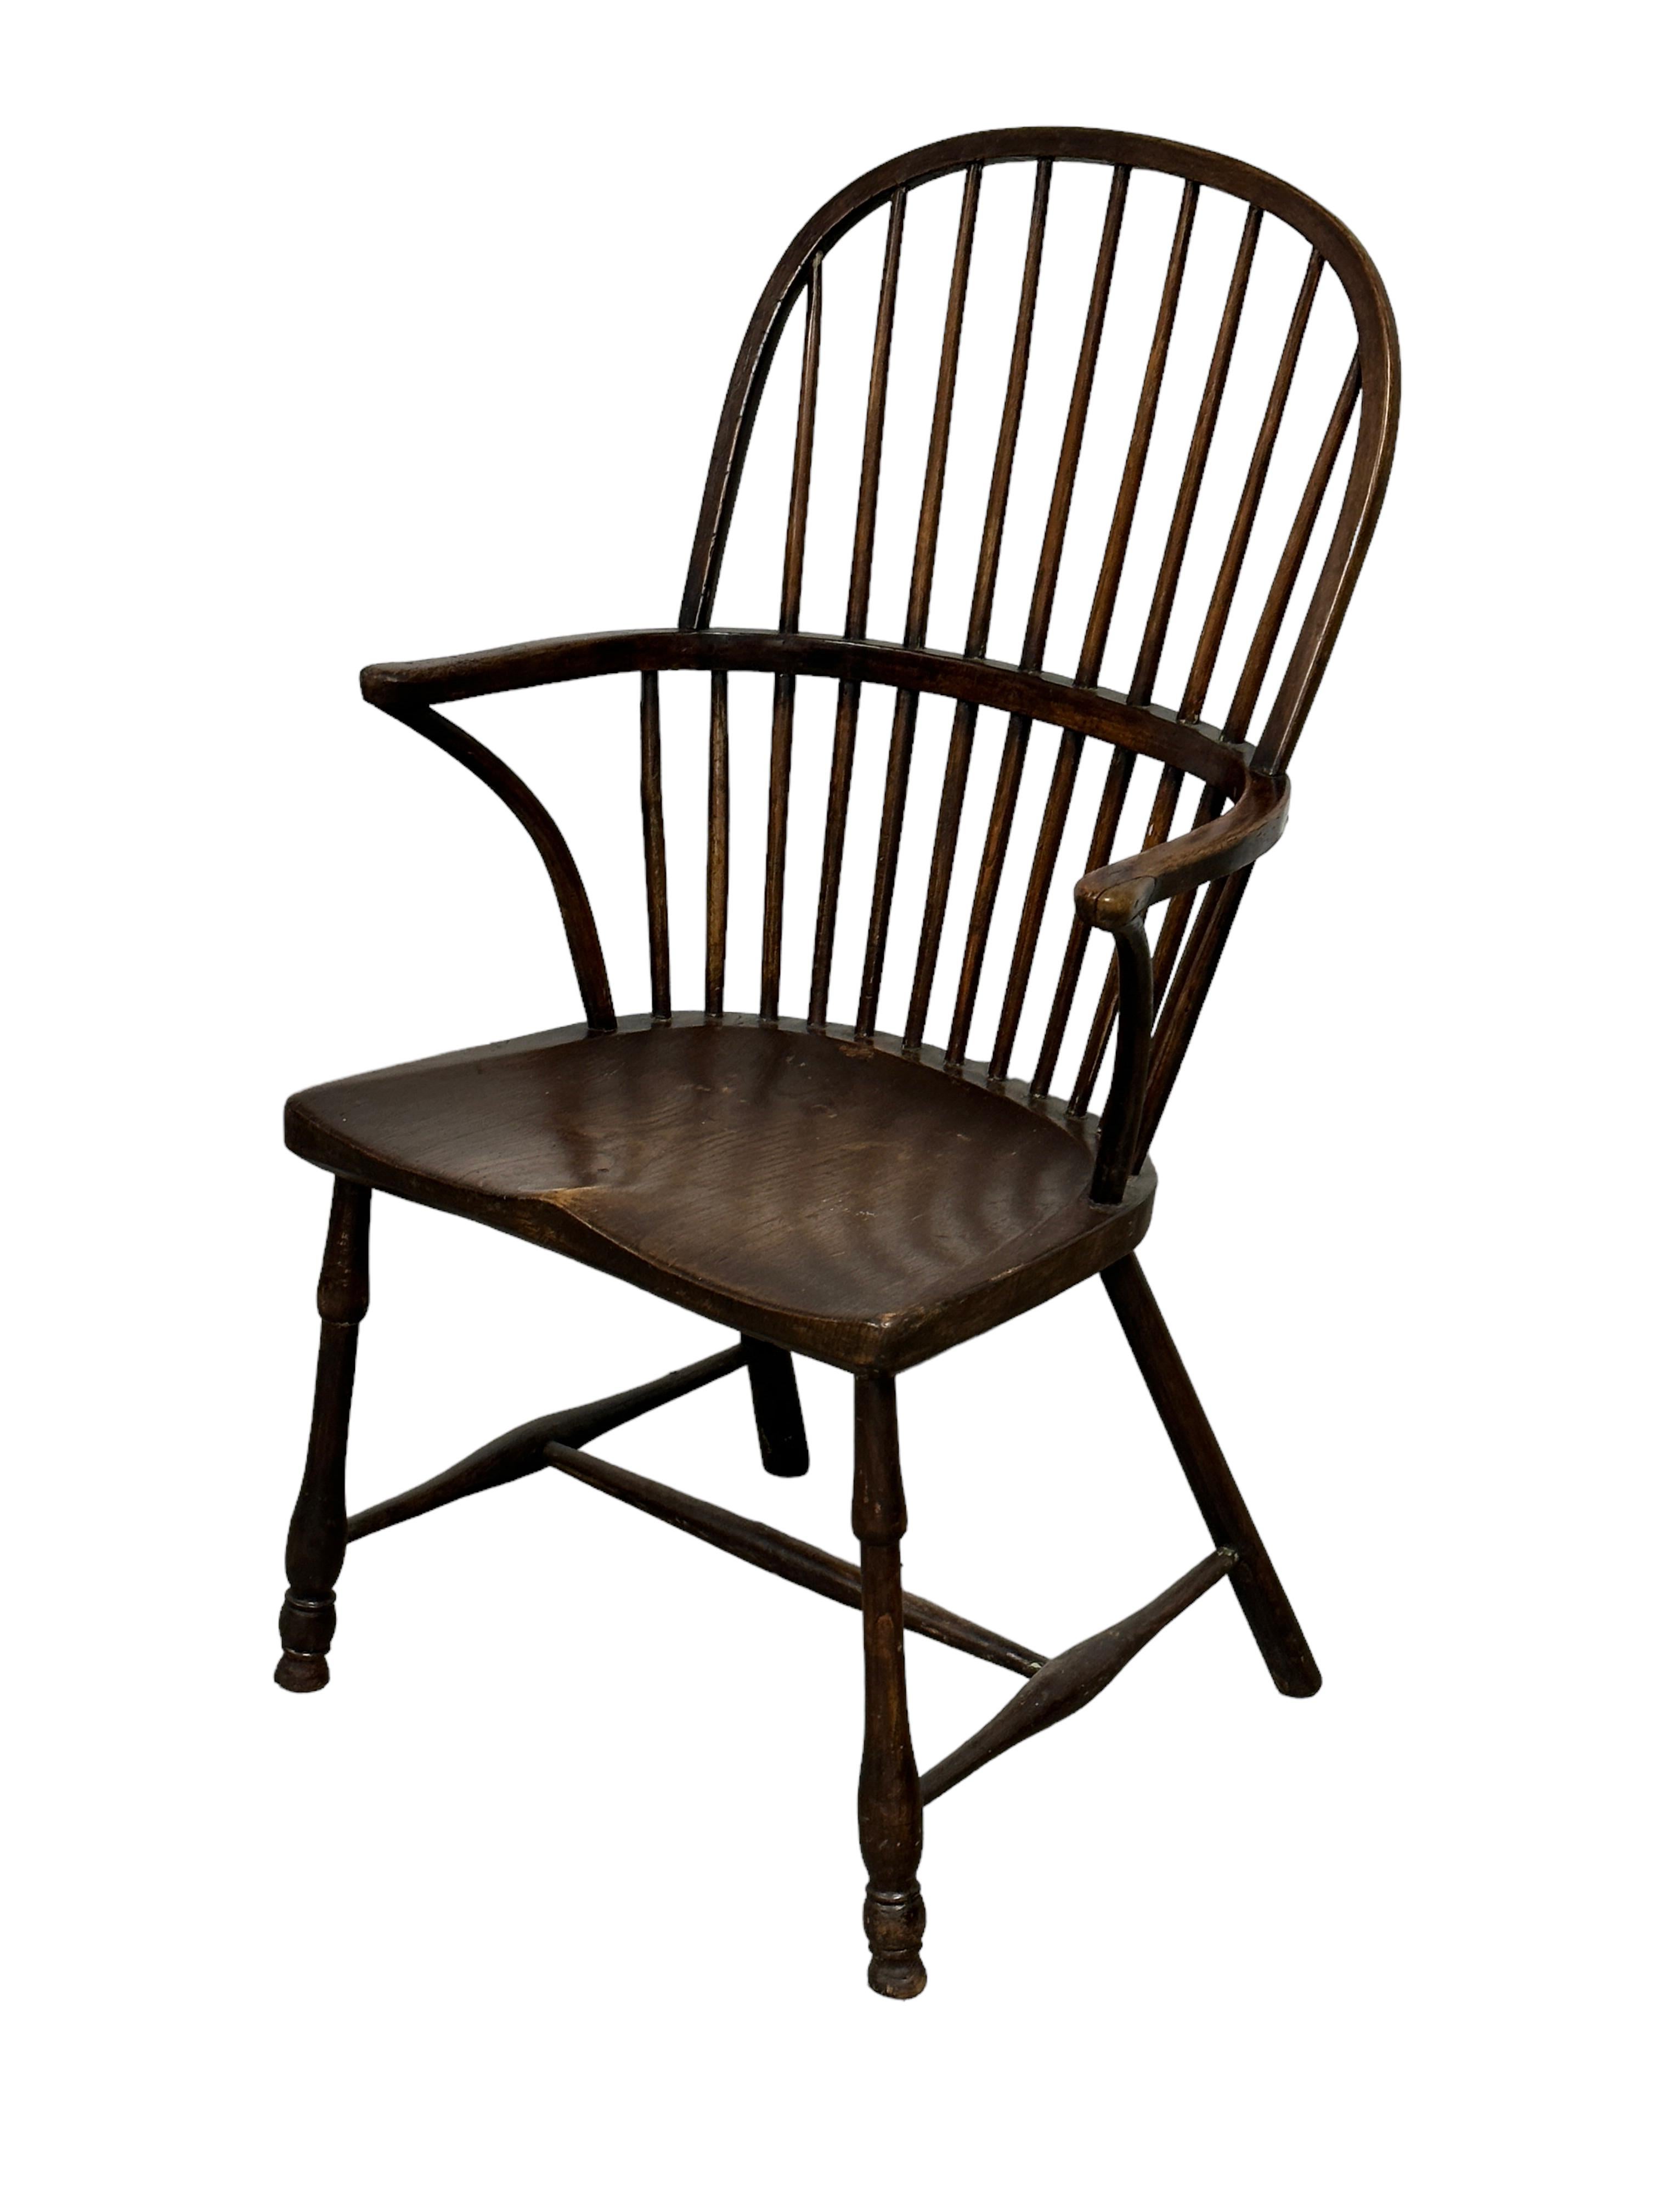 Beautiful Antique Windsor Wooden Chair, 19th Century, England 2